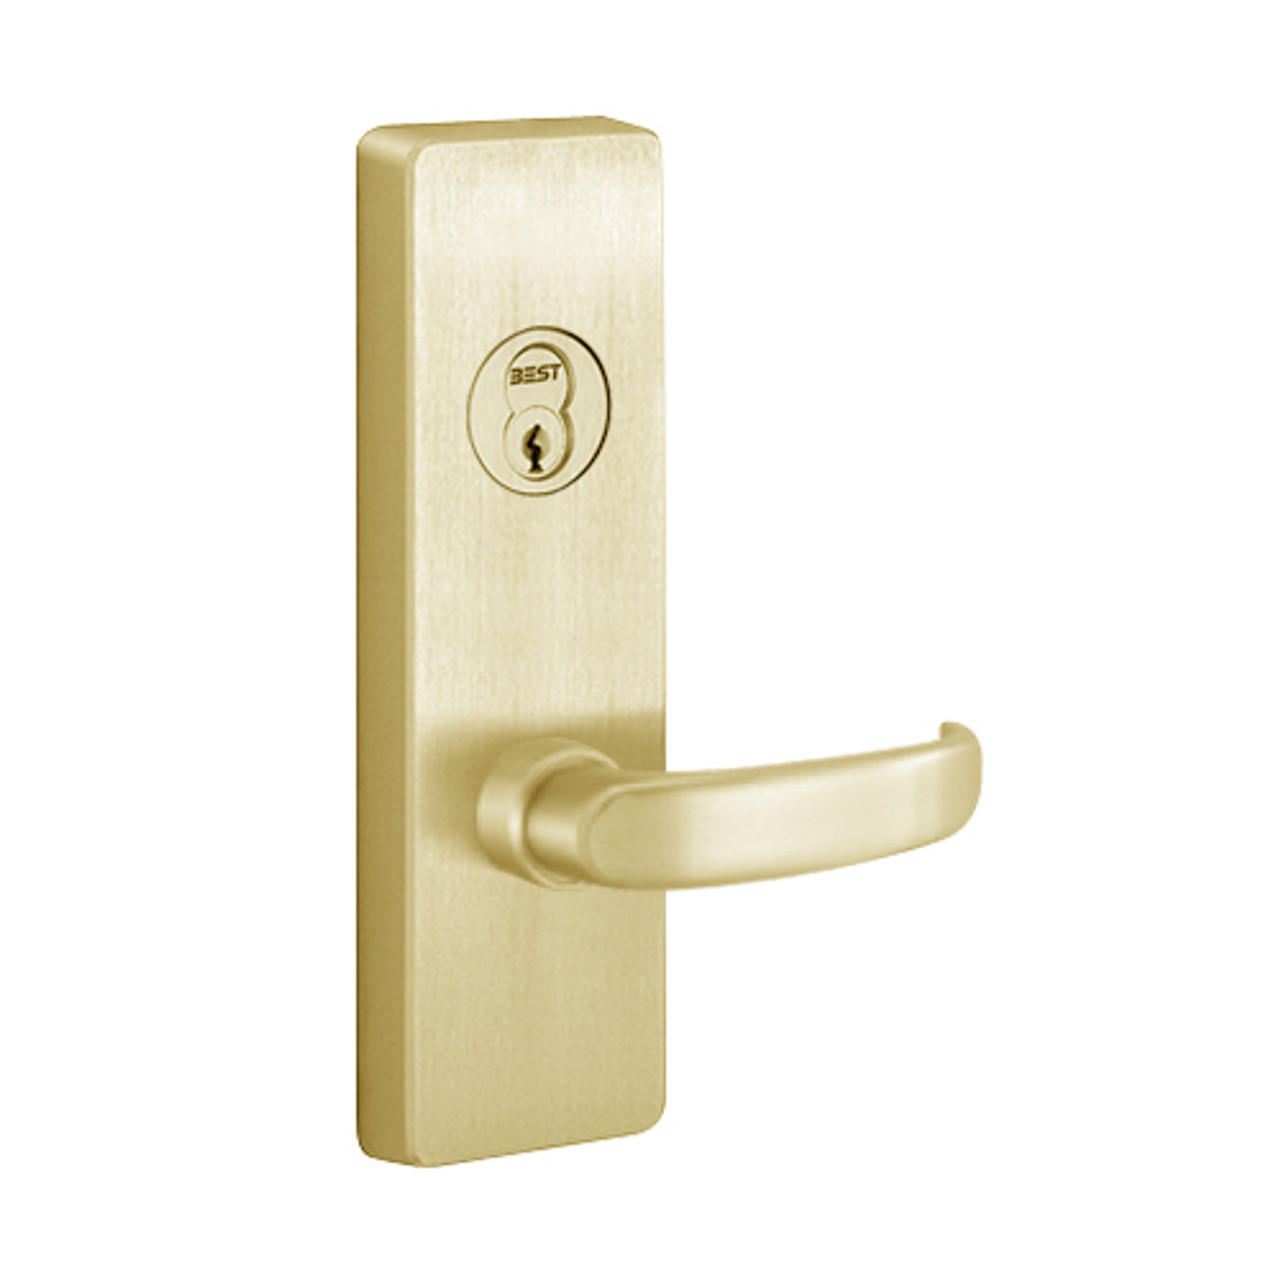 VY4908D-605-LHR PHI Key Controls Lever Vandal Resistant Trim with D Lever Design for Olympian Series Exit Device in Bright Brass Finish